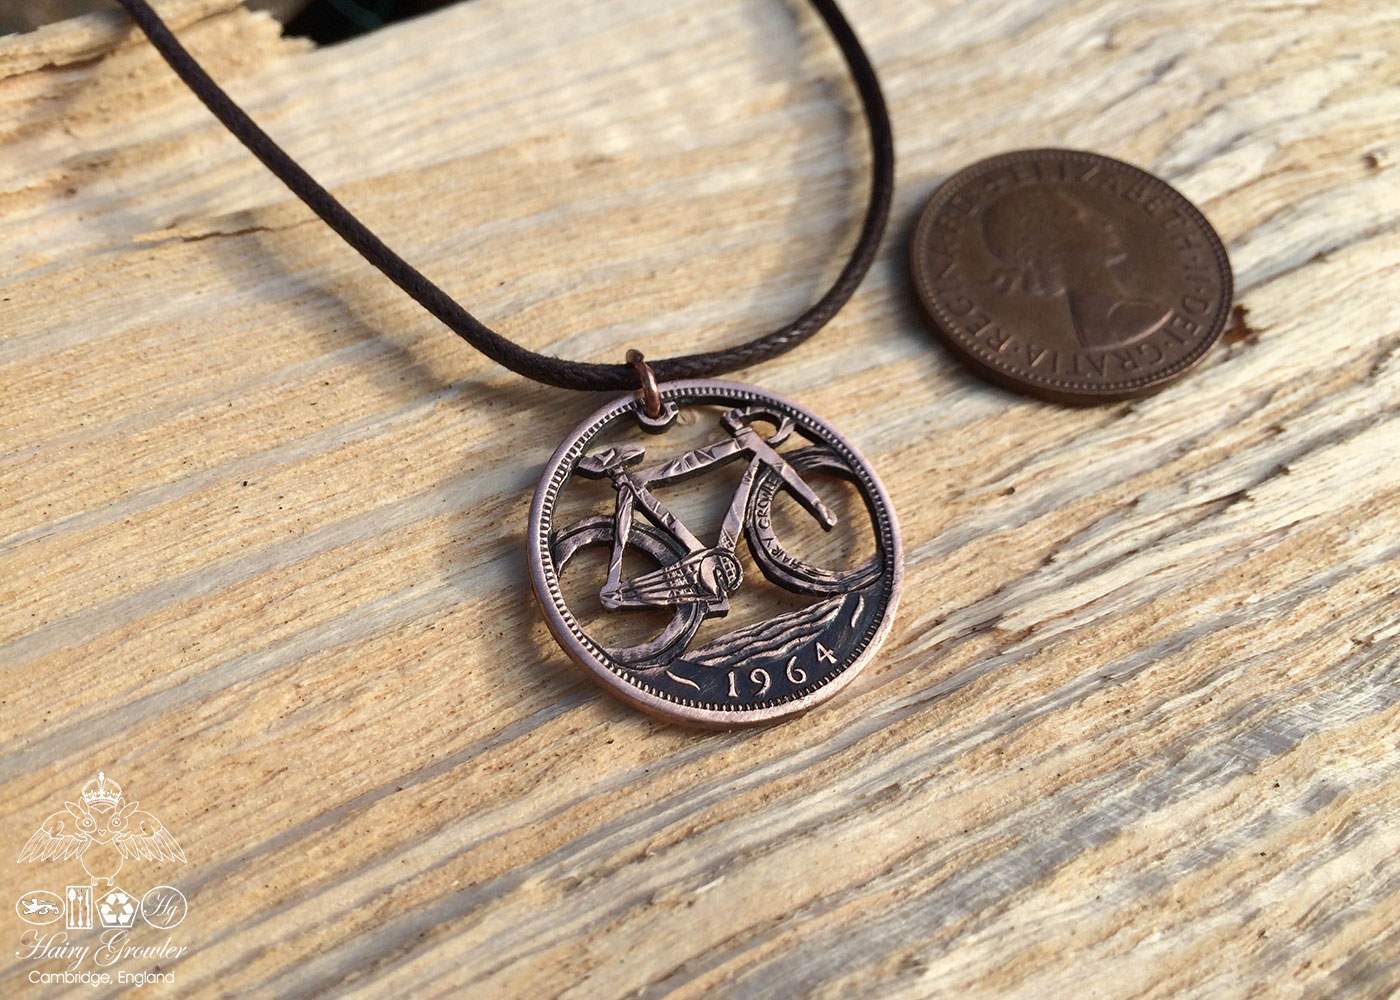 Handcrafted and recycled coin fixed speed bicycle pendant necklace.